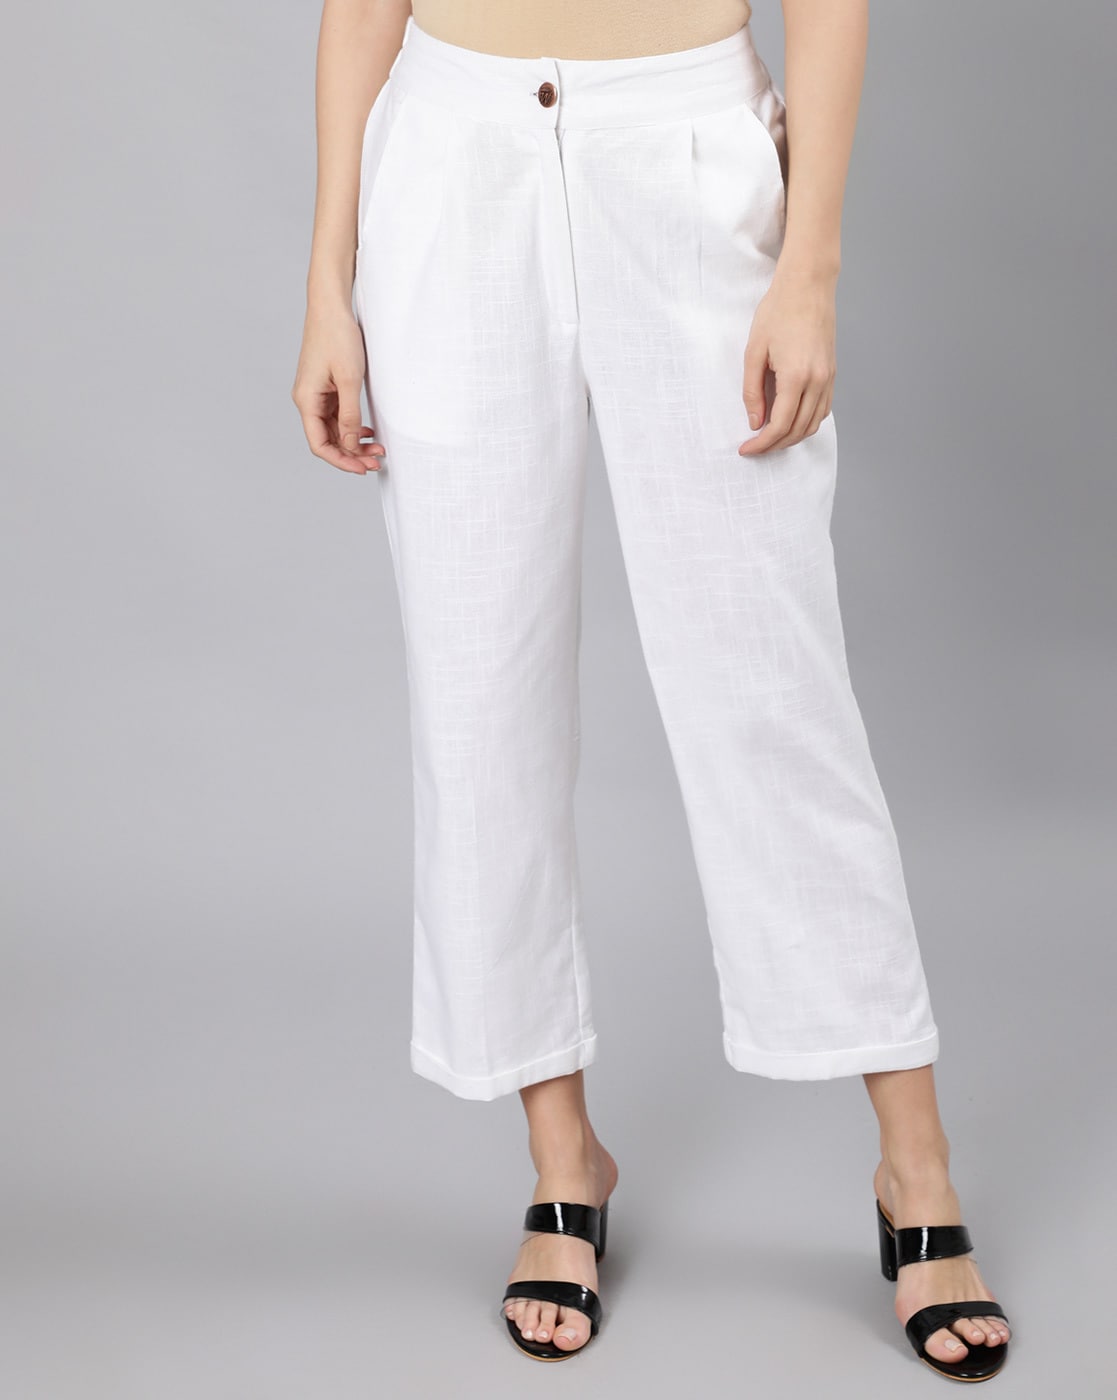 Buy FUNYYZO Womens Wide Leg Pants High Elastic Waisted in The Back  Business Work Trousers Long Straight Suit Pants 006 White Thin XSmall  Long at Amazonin